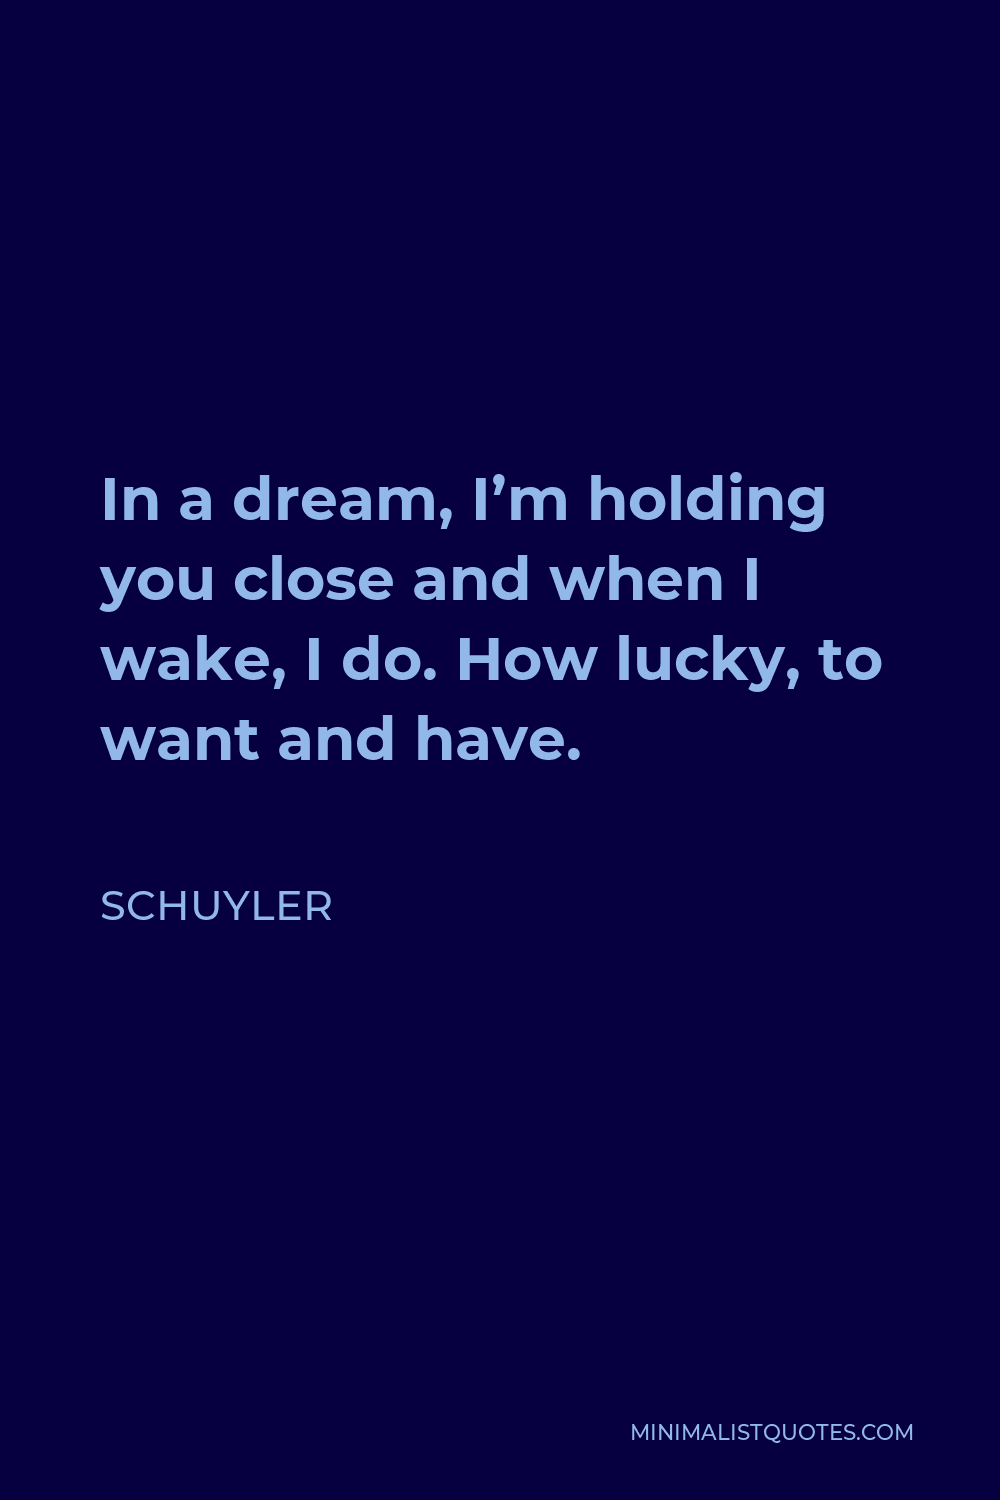 Schuyler Quote - In a dream, I’m holding you close and when I wake, I do. How lucky, to want and have.